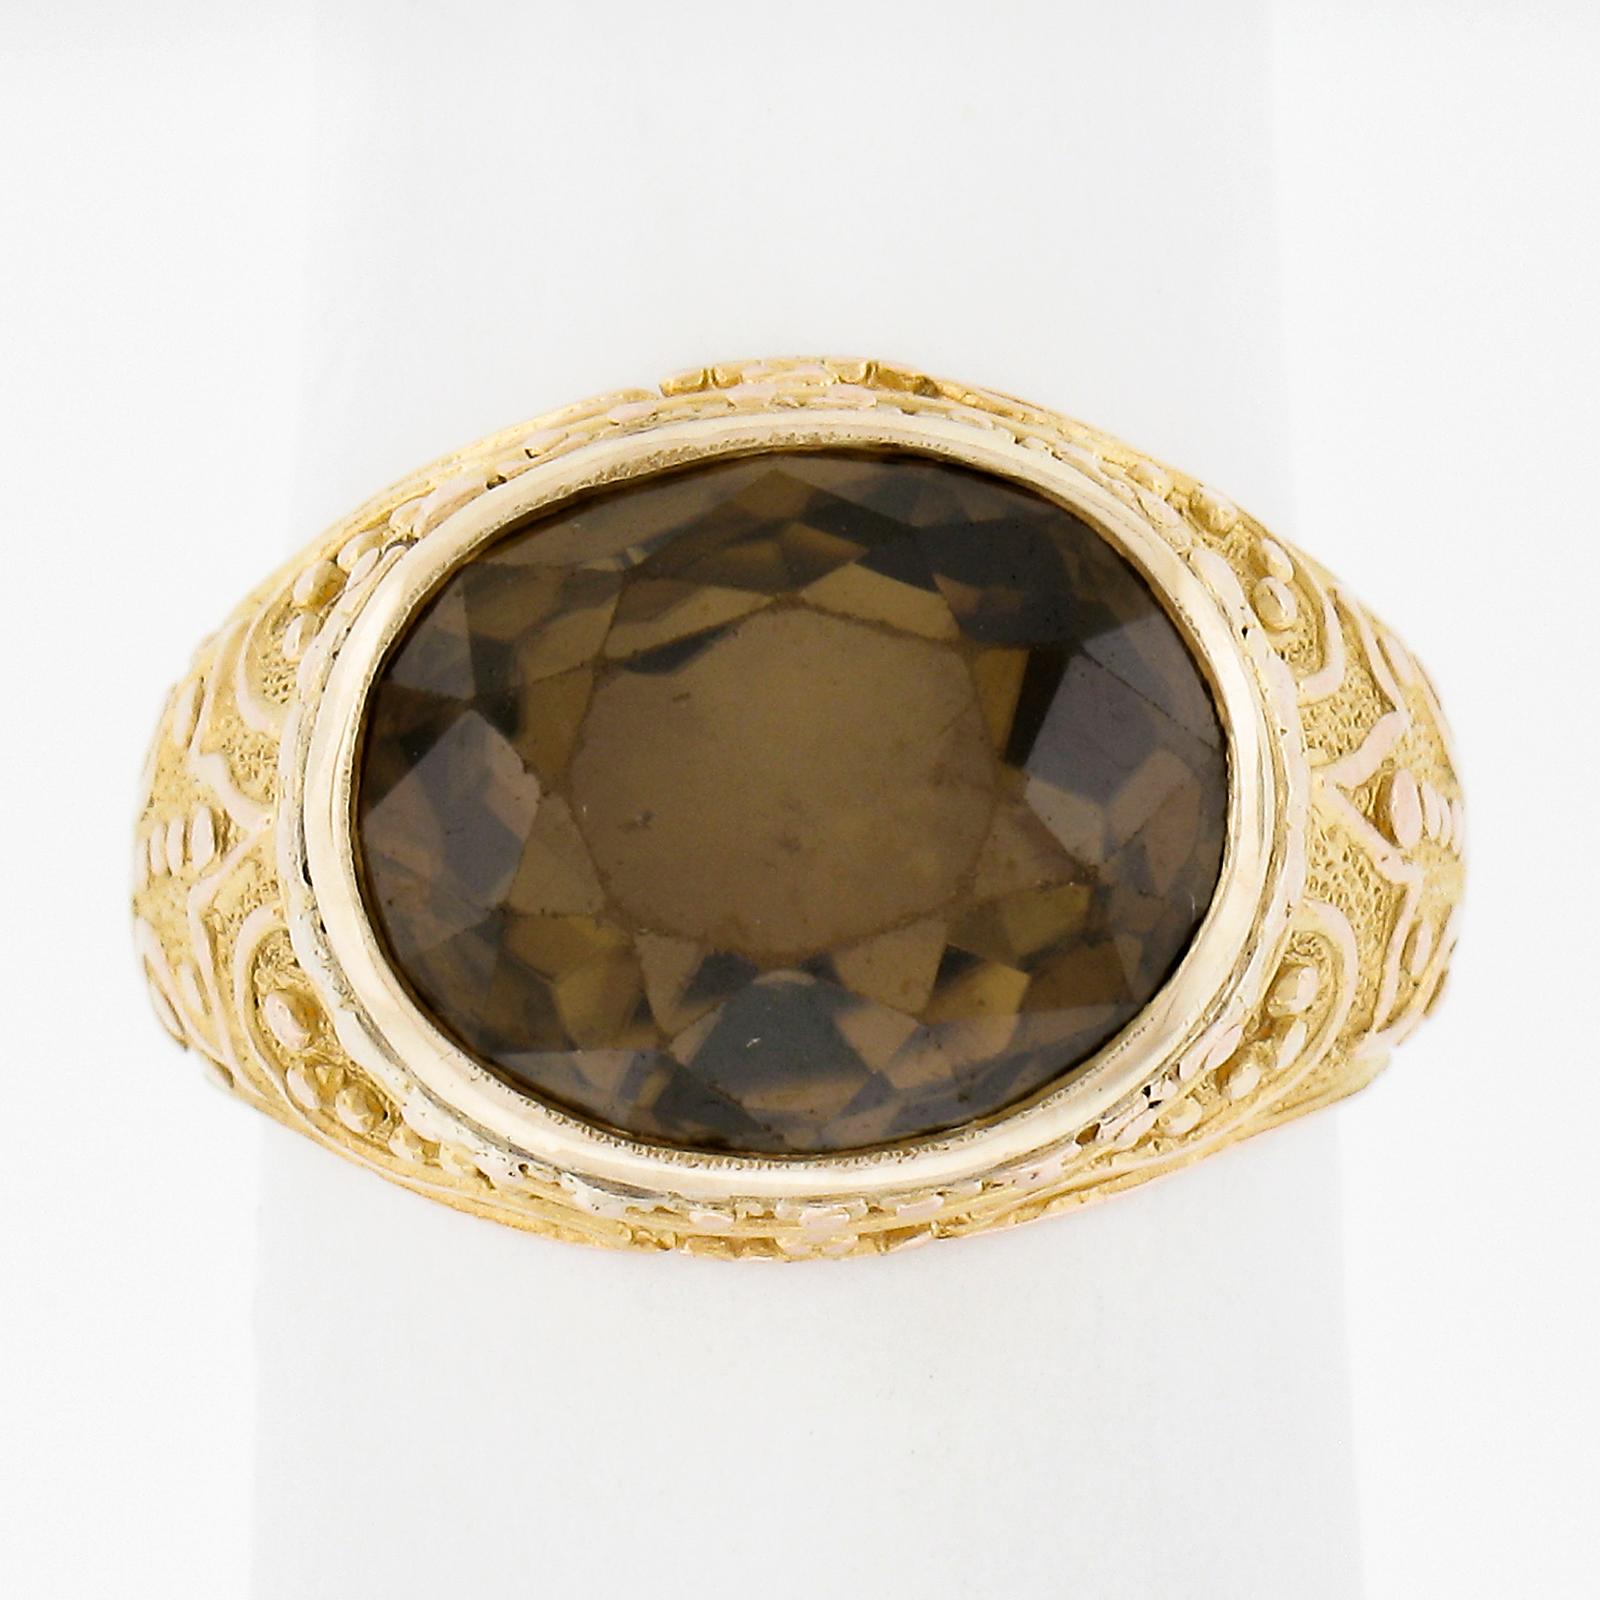 --Stone(s):--
(1) Natural Genuine Zircon - Oval Brilliant Cut - Bezel Set - Brownish Yellow Color 
** See Certification Details Below for Complete Info **

Material: Solid 18k Yellow Gold , w/ 14k Yellow Gold Shank (sized at some point)
Weight: 8.76